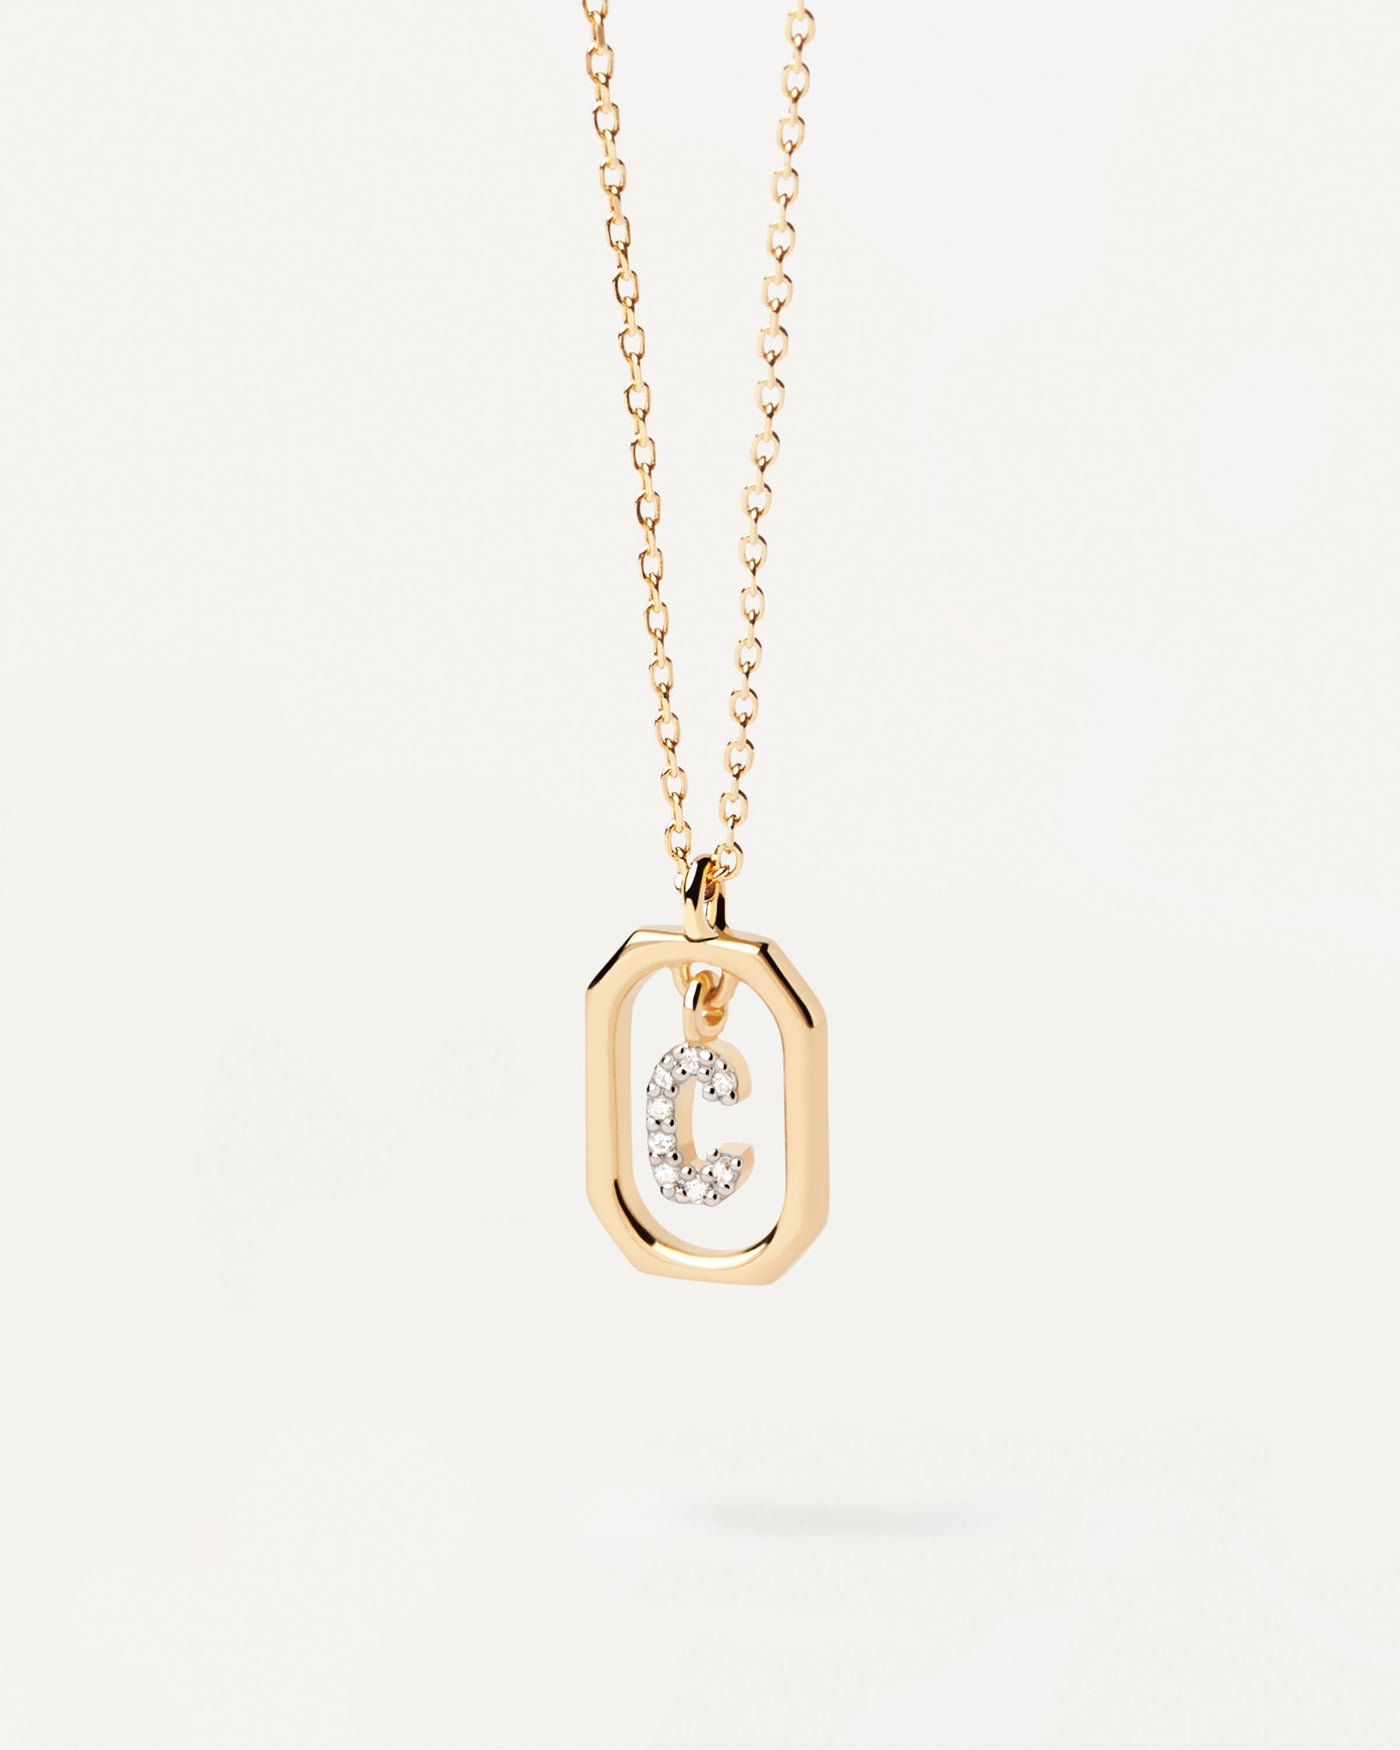 2023 Selection | Mini Letter C Necklace. Small initial C necklace in zirconia inside gold-plated silver octagonal pendant. Get the latest arrival from PDPAOLA. Place your order safely and get this Best Seller. Free Shipping.